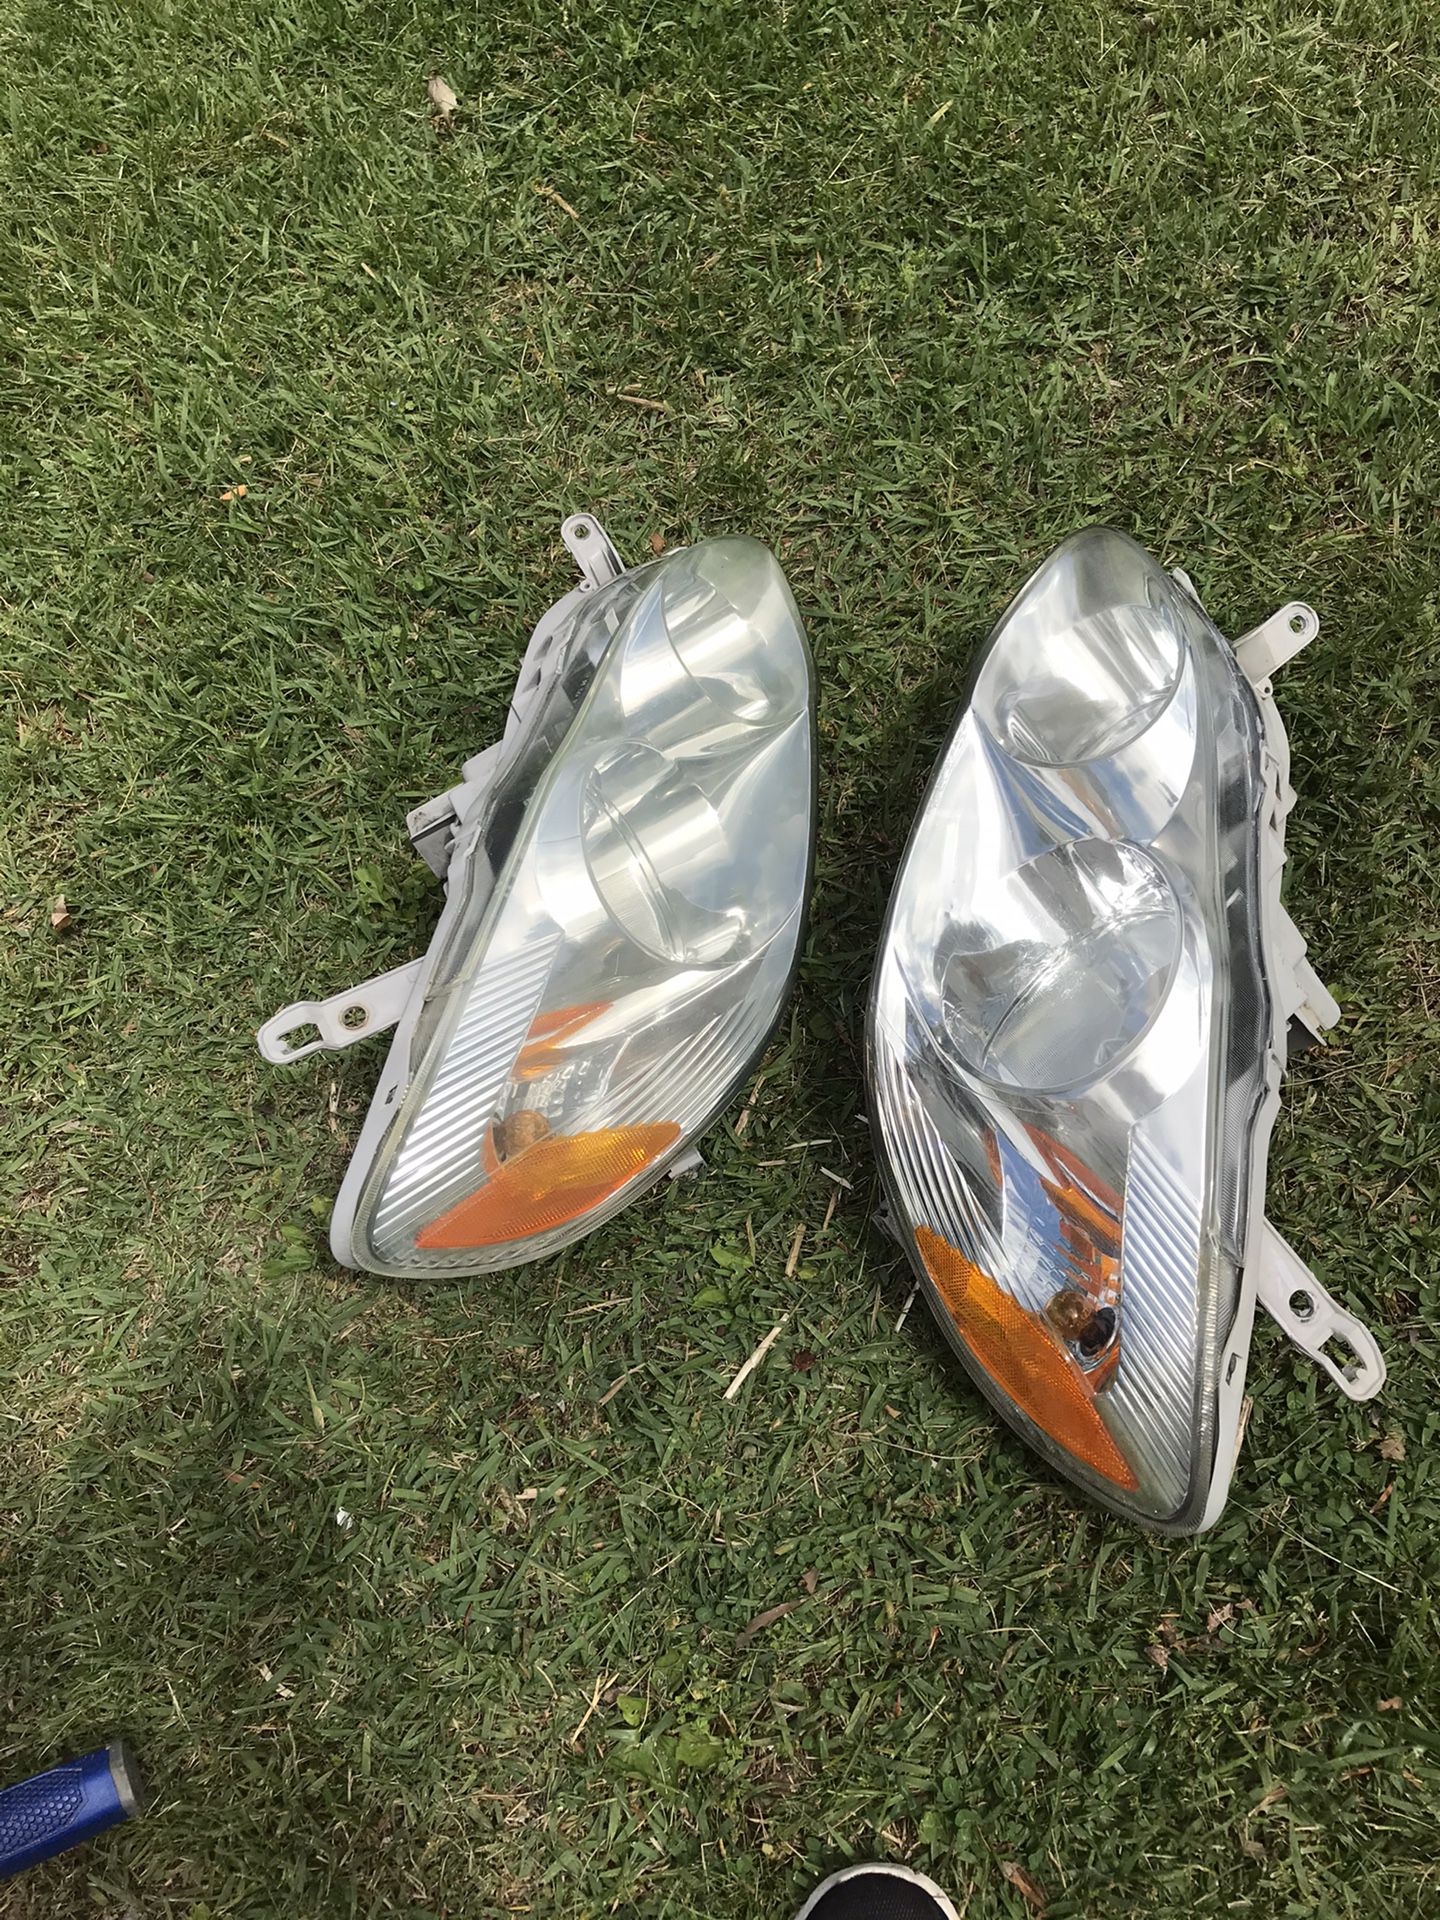 Head lights Toyota Corolla 2003 to 2007 and starter